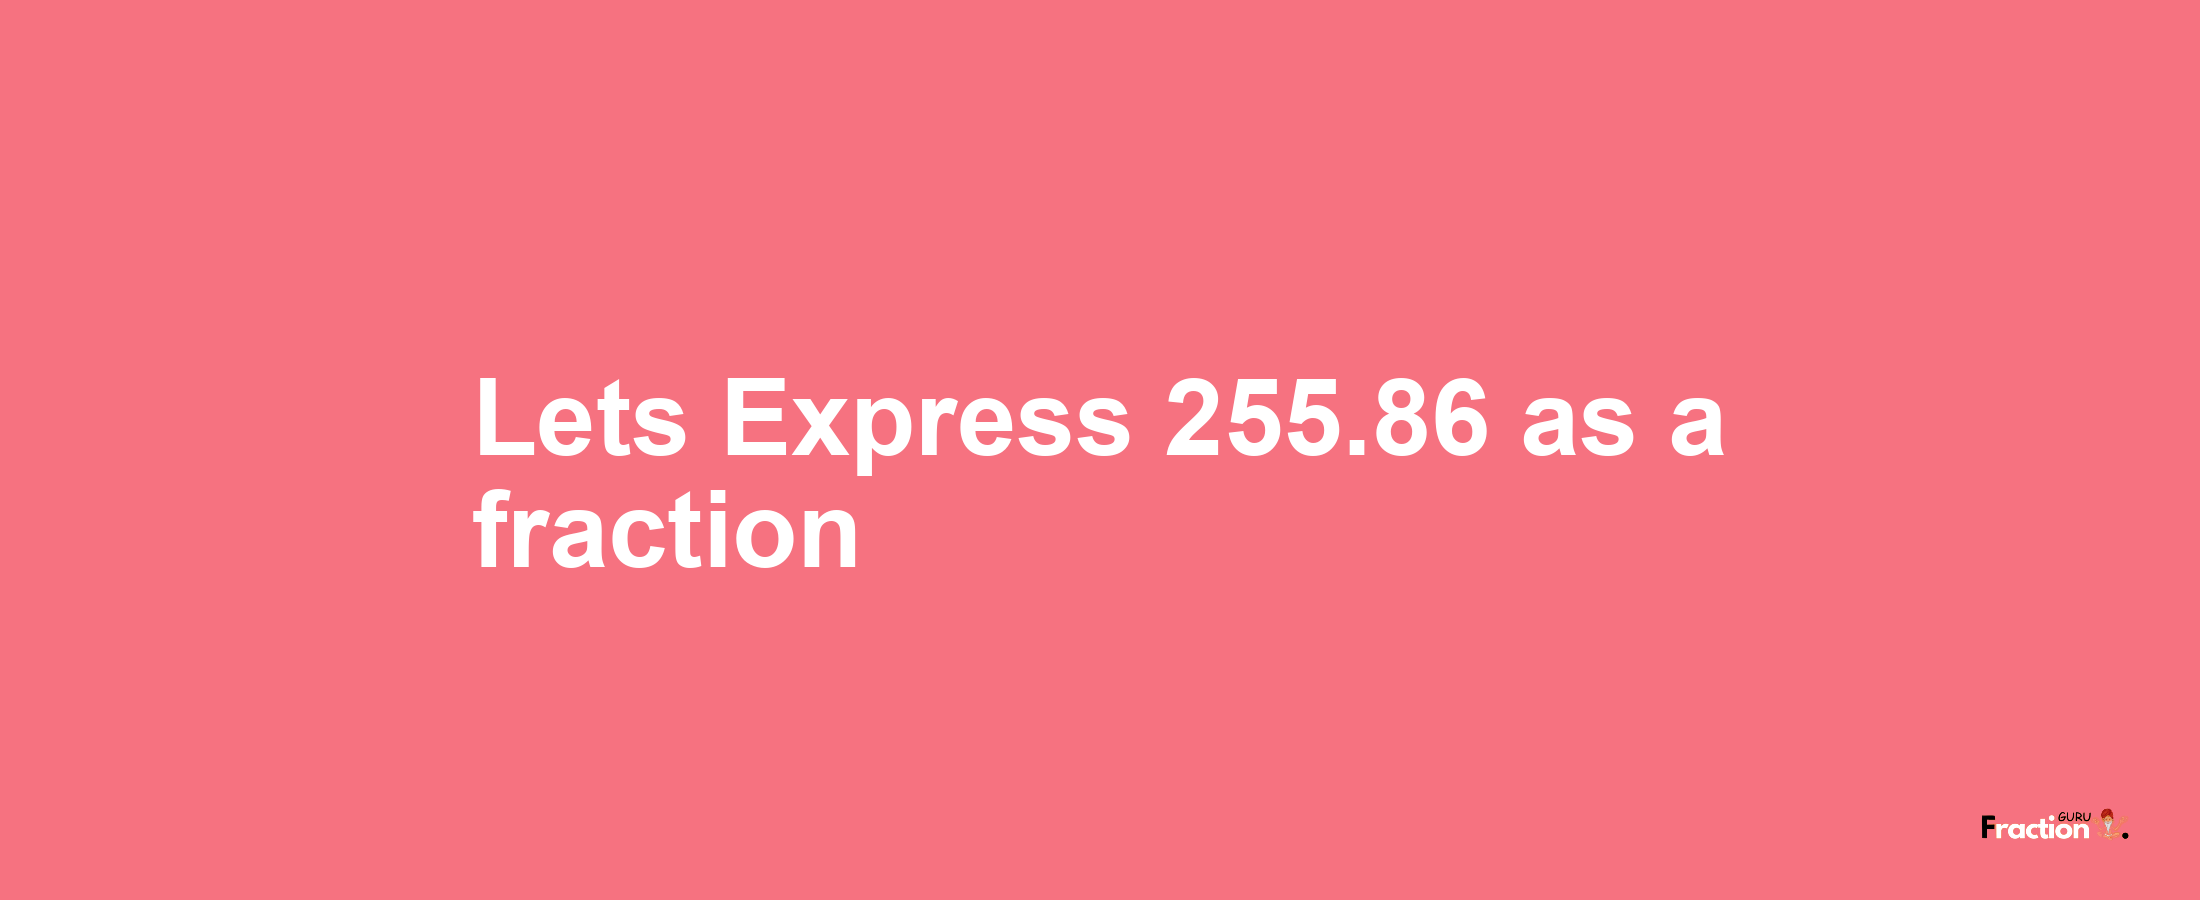 Lets Express 255.86 as afraction